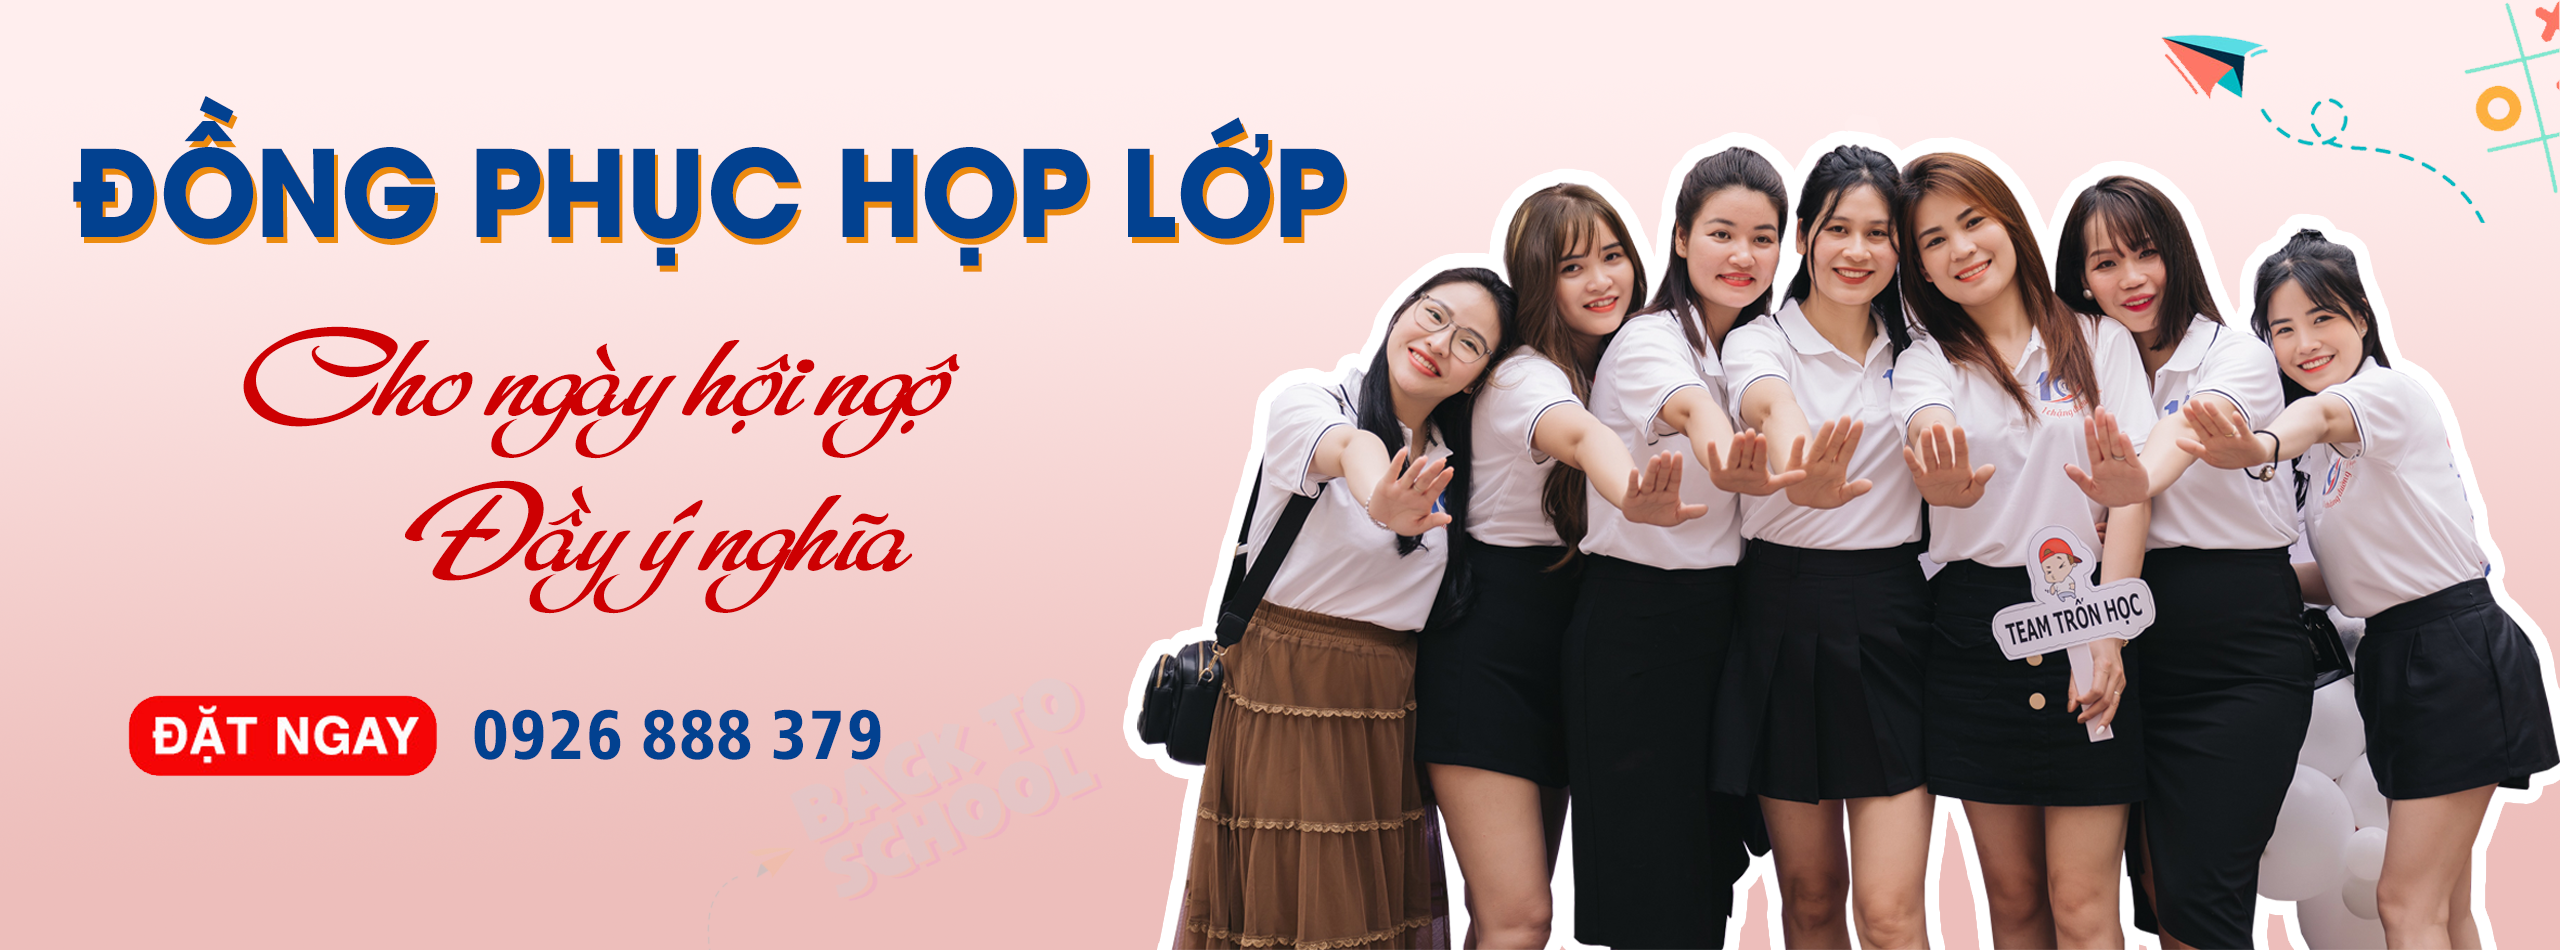 Banner họp lớp